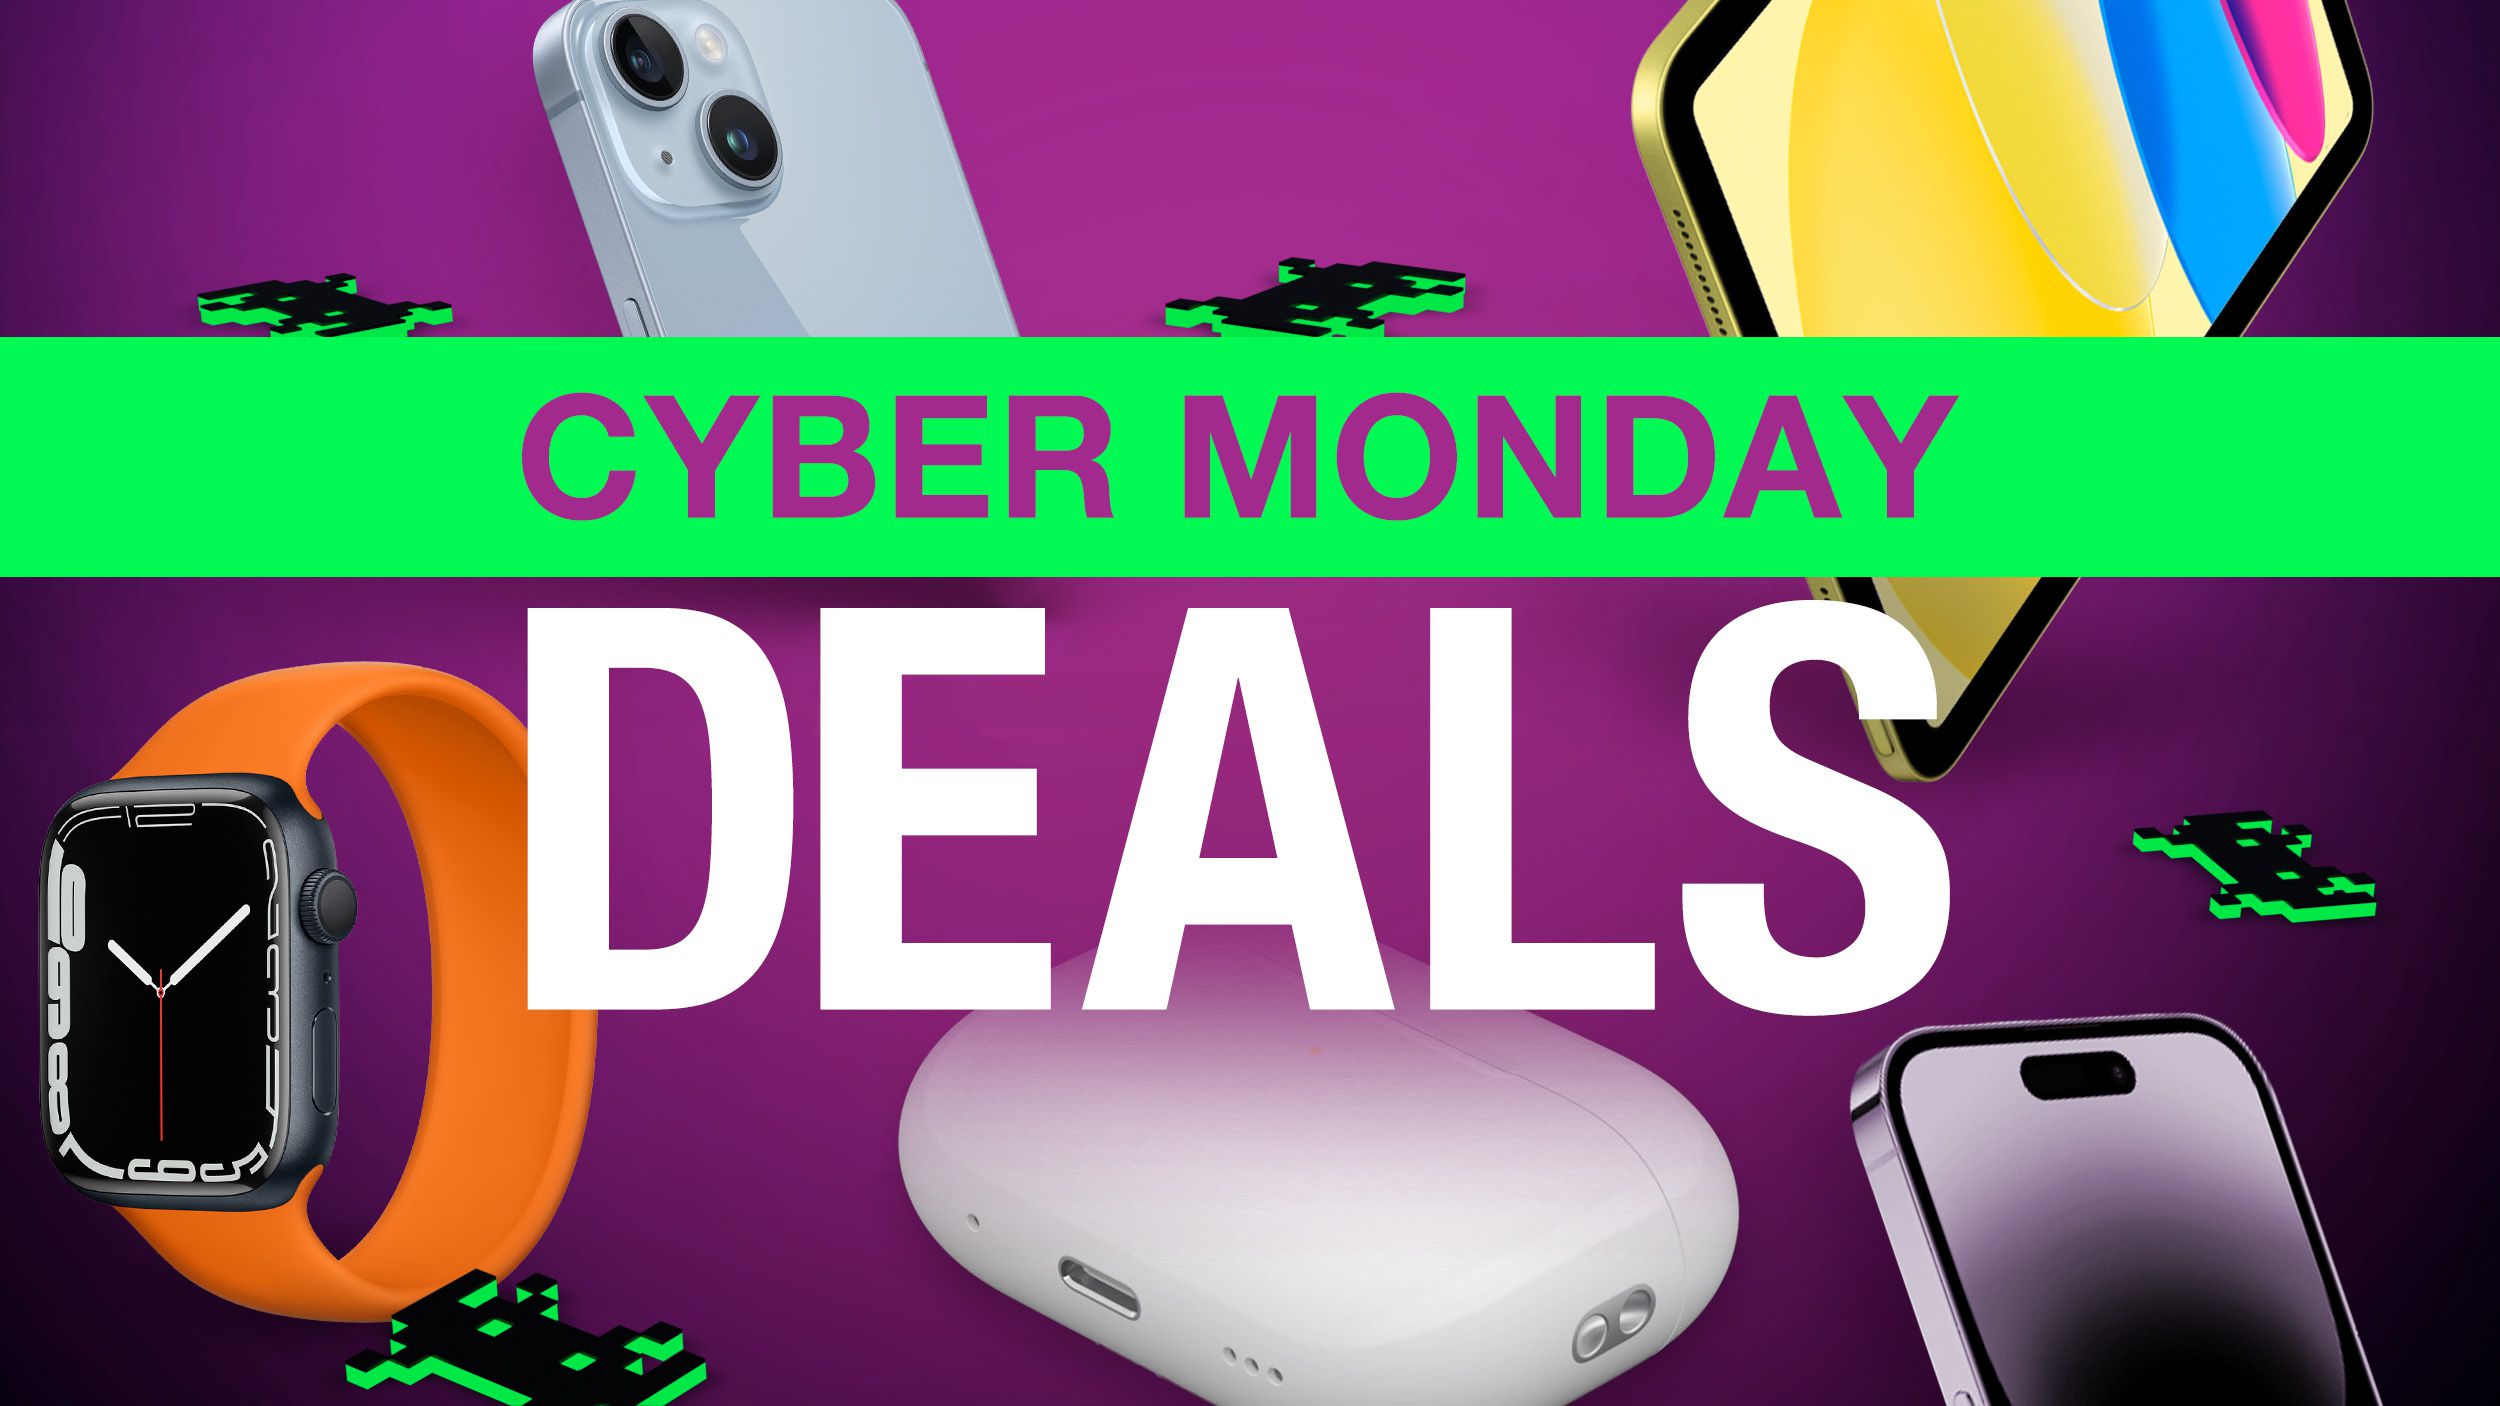 Best Cyber Monday Apple Deals for AirPods, Apple TV 4K, iPad, More